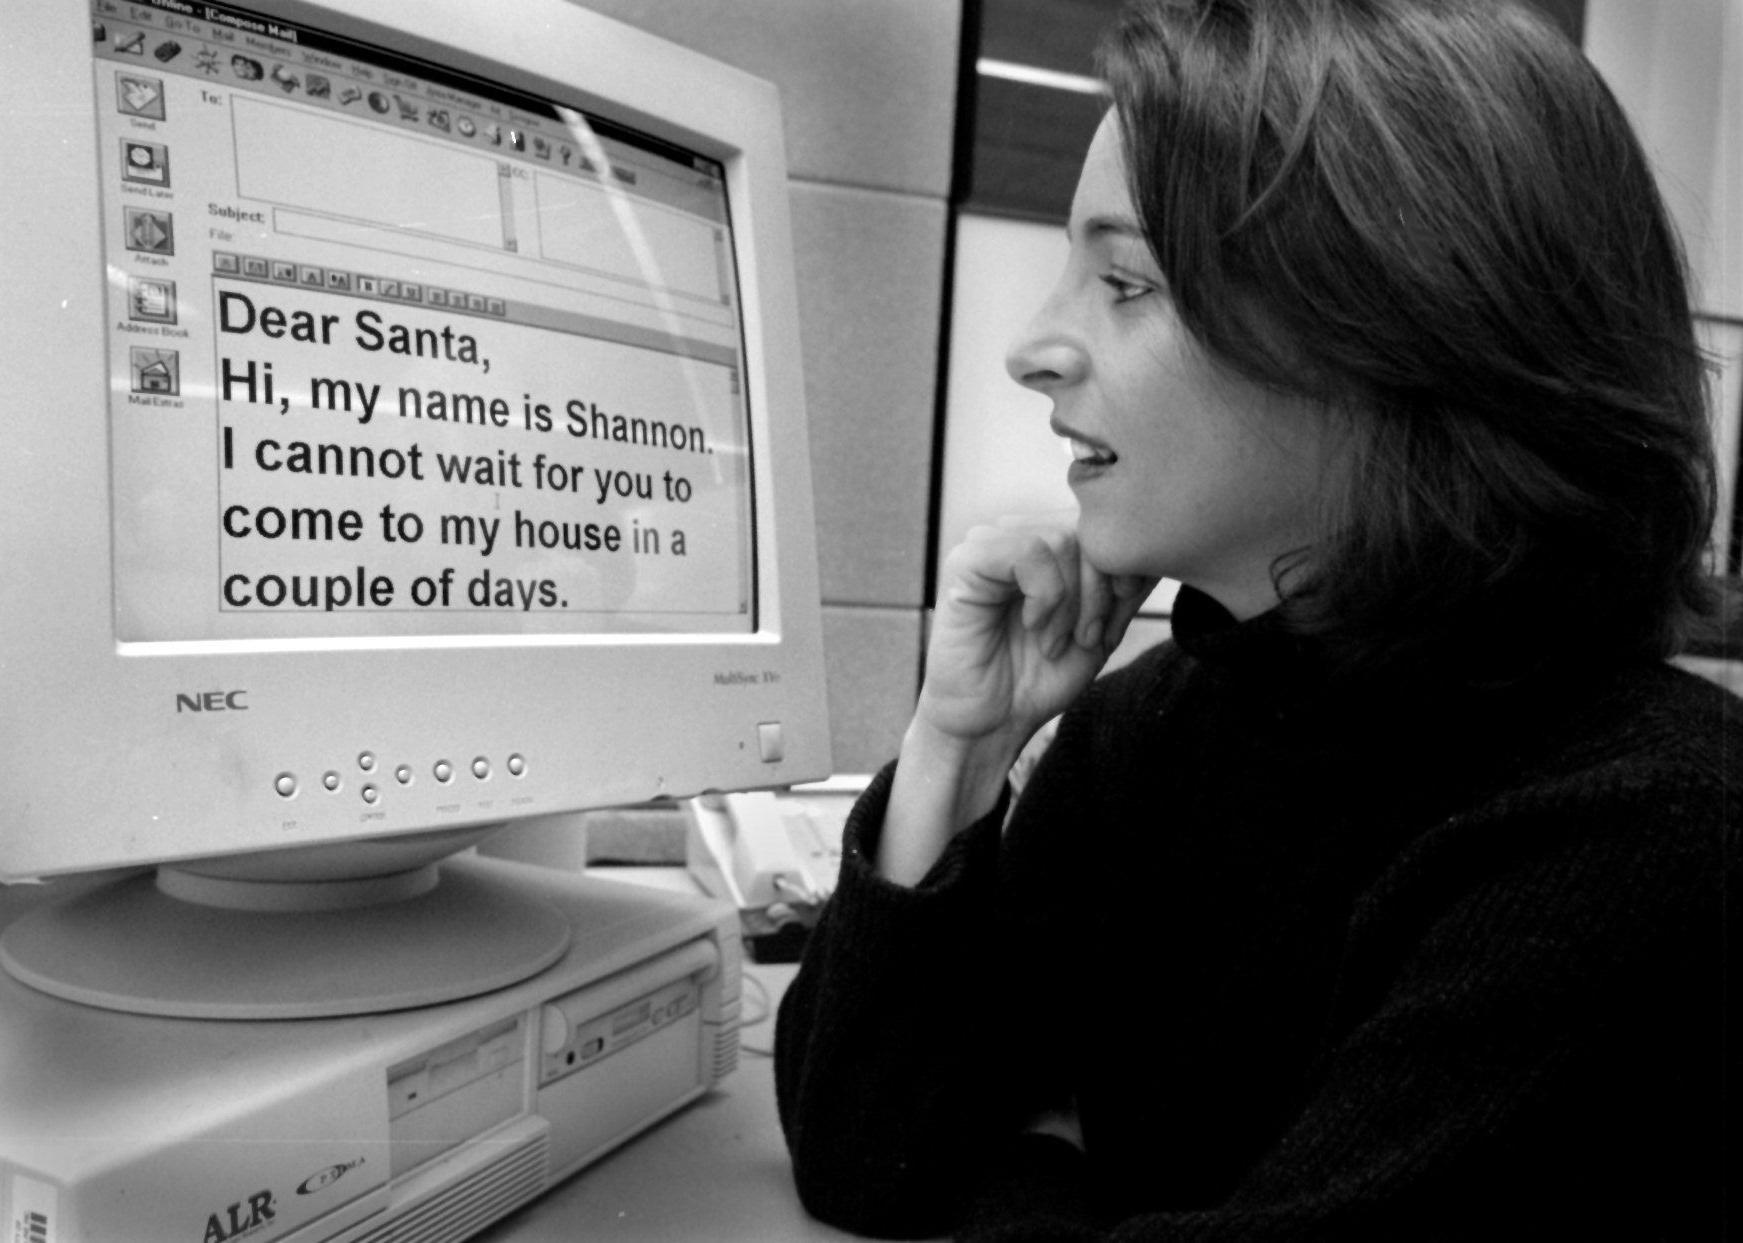 An employee at American Online with a Santa email on her computer